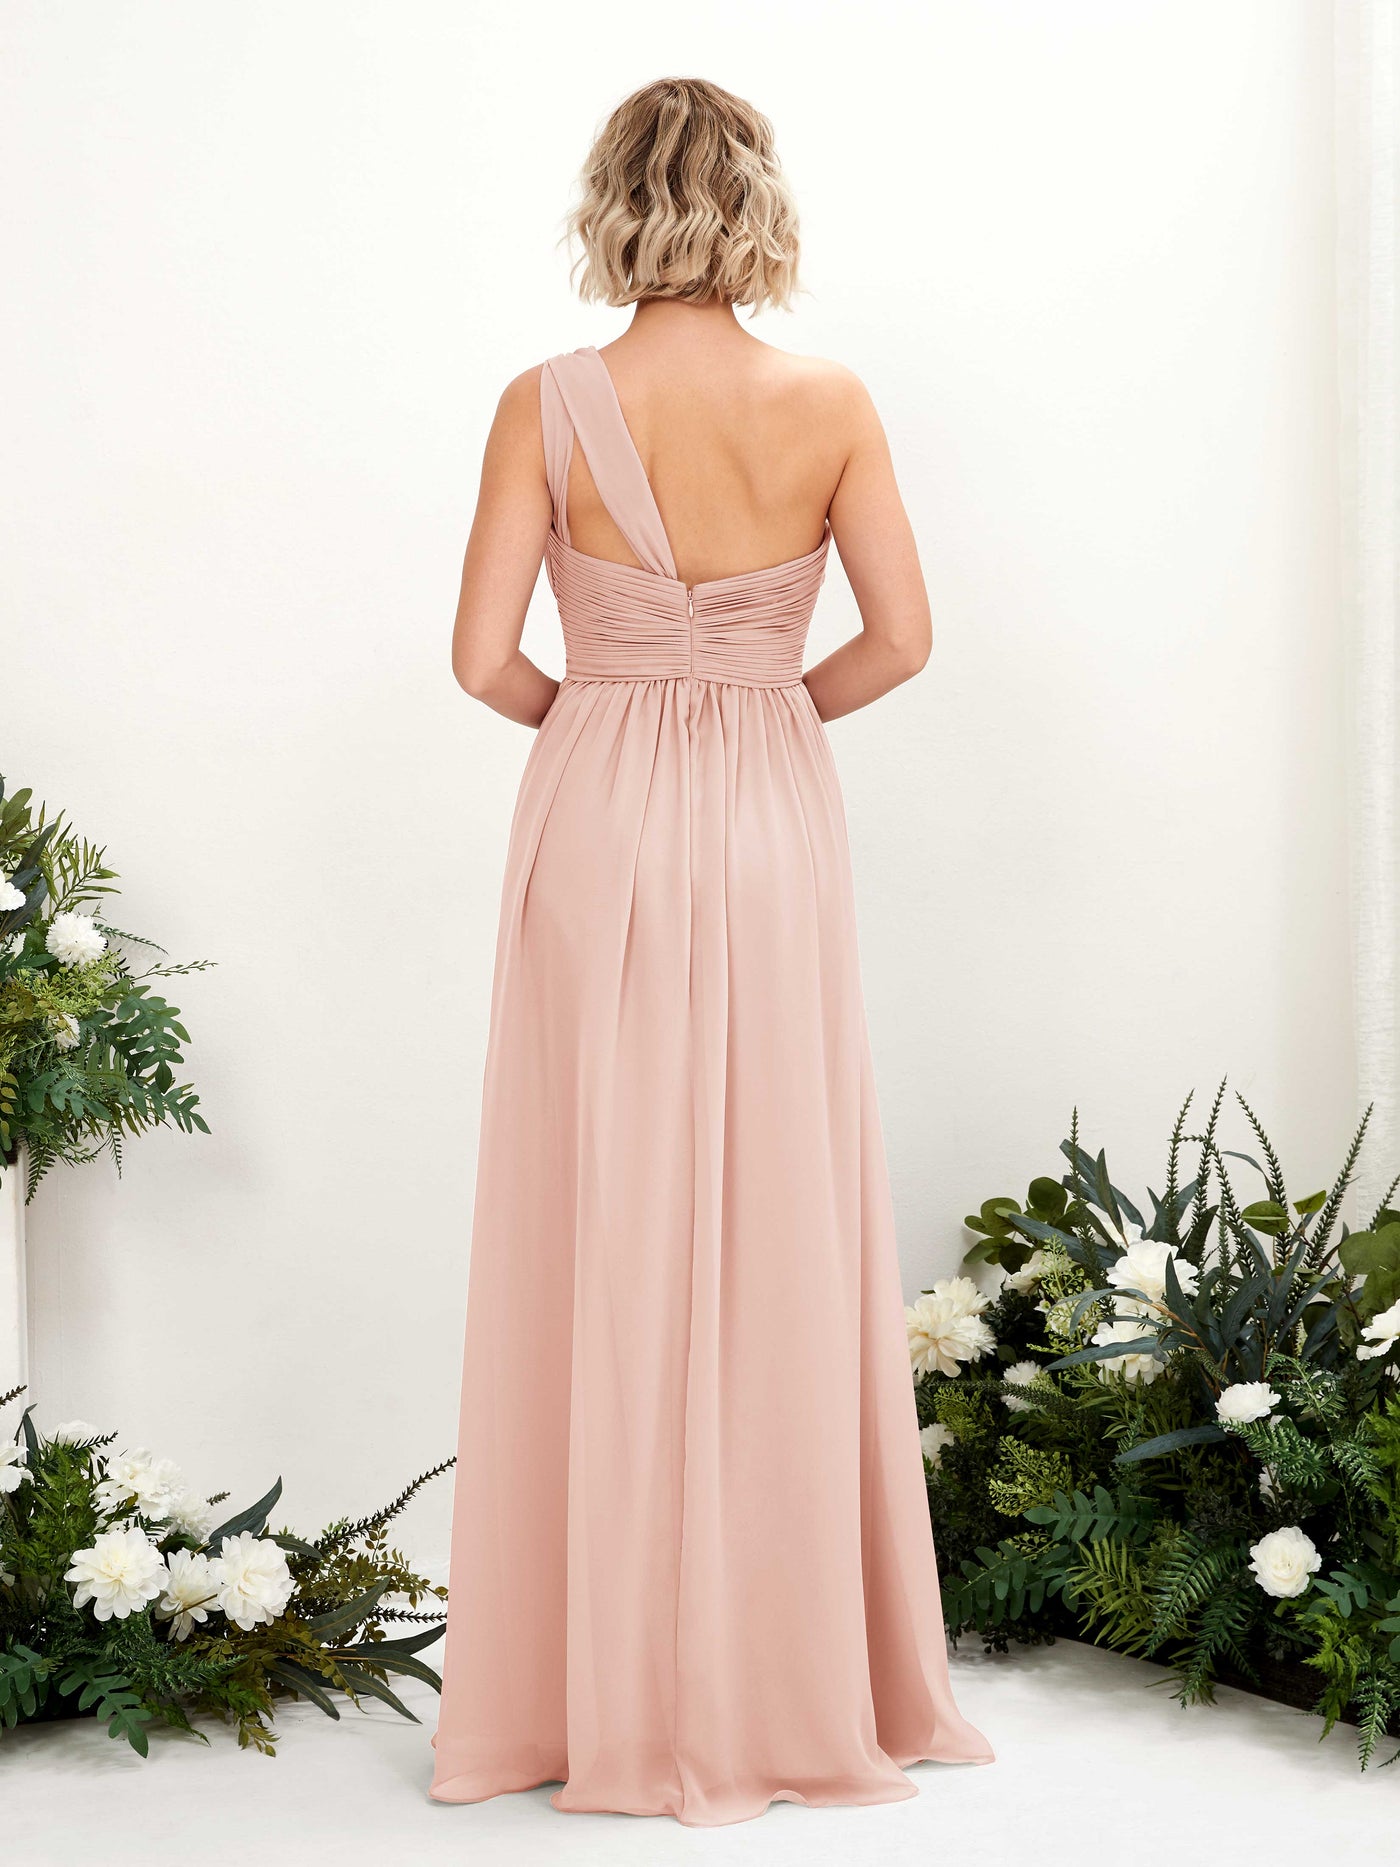 Pearl Pink Bridesmaid Dresses Bridesmaid Dress Ball Gown Chiffon One Shoulder Full Length Sleeveless Wedding Party Dress (81225008)#color_pearl-pink